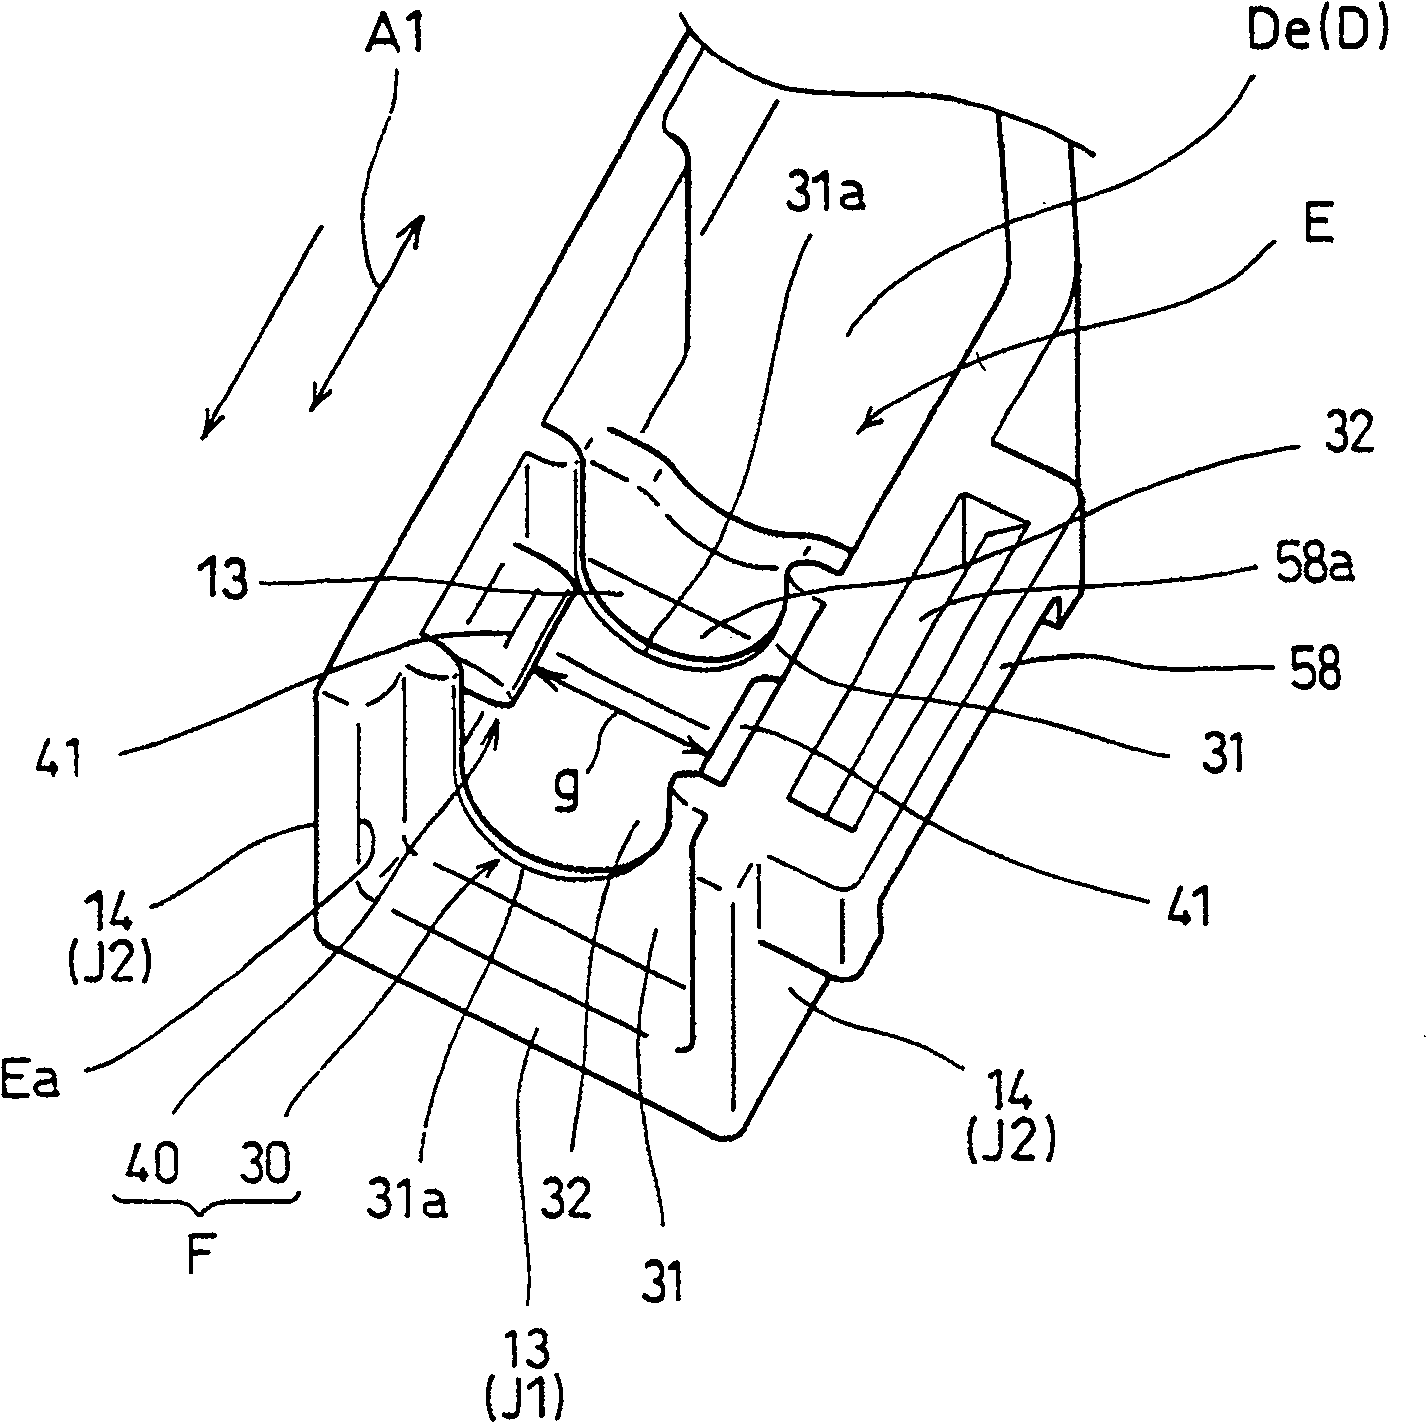 Bundle conductor set containing bundle conductor and retainer thereof, method for producing the bundle conductor